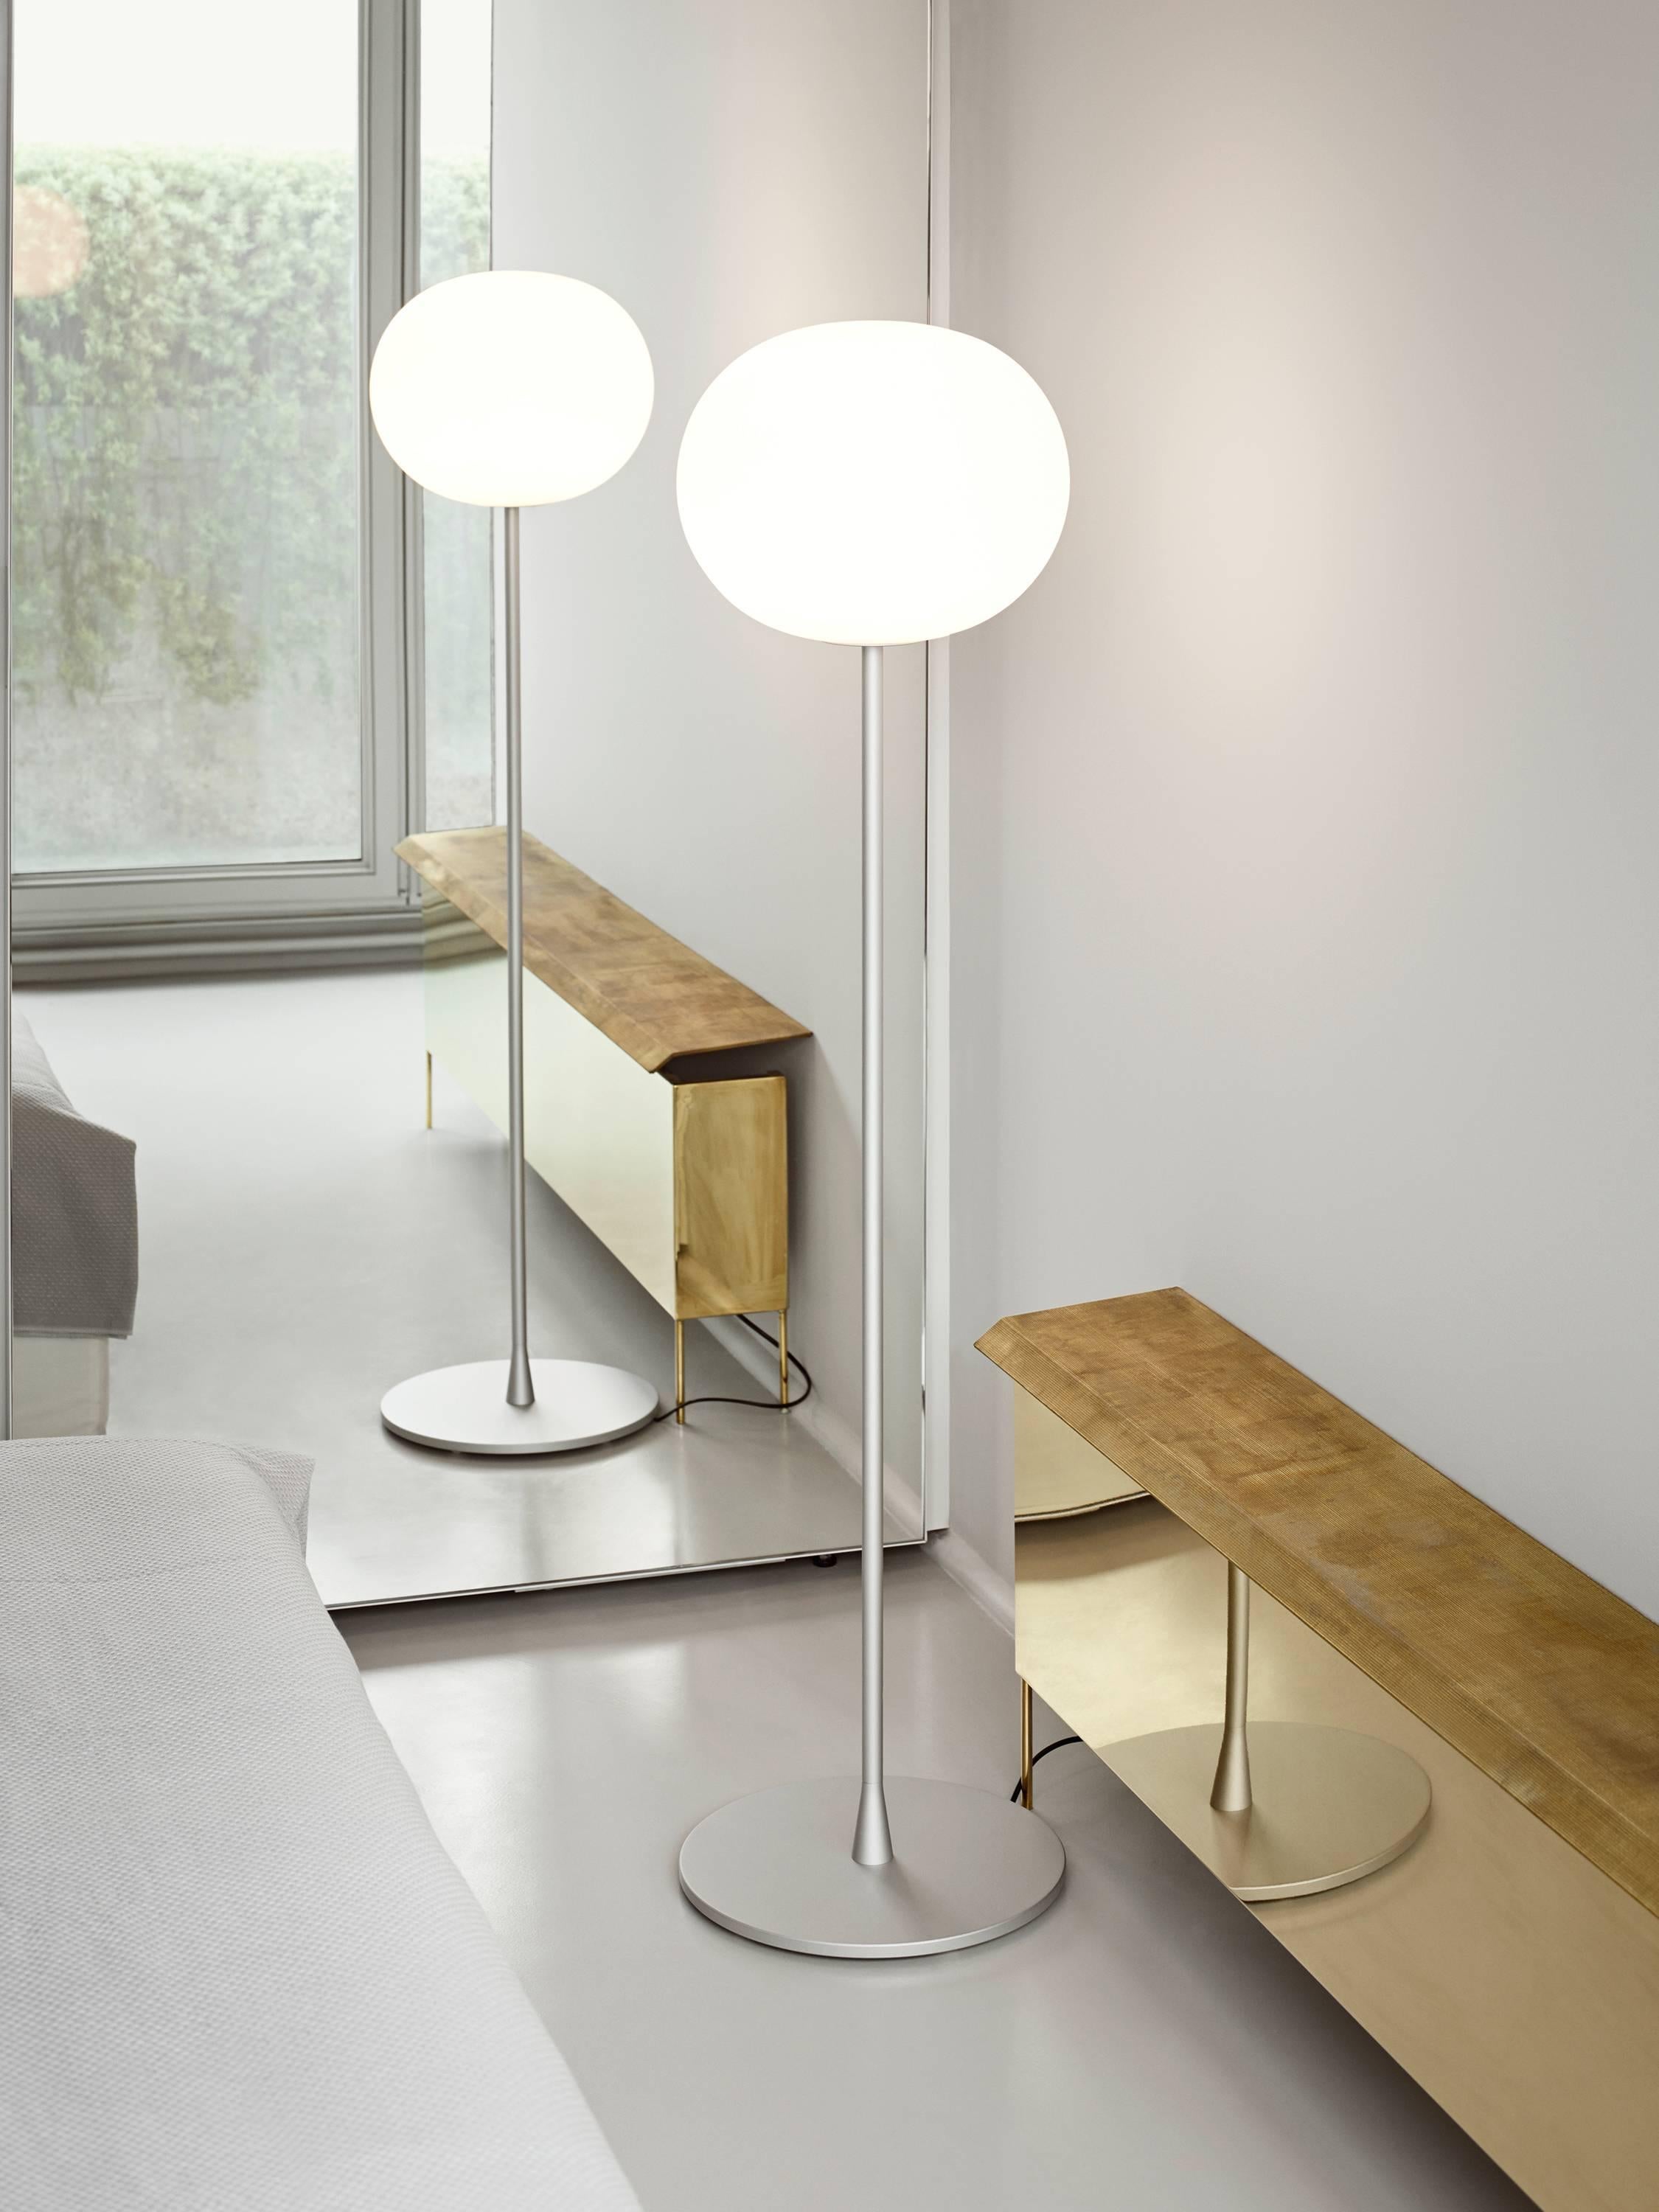 FLOS Glo-Ball F3 Halogen Floor Lamp by Jasper Morrison
Part of the popular Glo Ball Series, the Glo Ball-F was created in 1998 by artist Jasper Morrison to invoke the radiant calm of a full moon. This contemporary floor lamp fits naturally into any